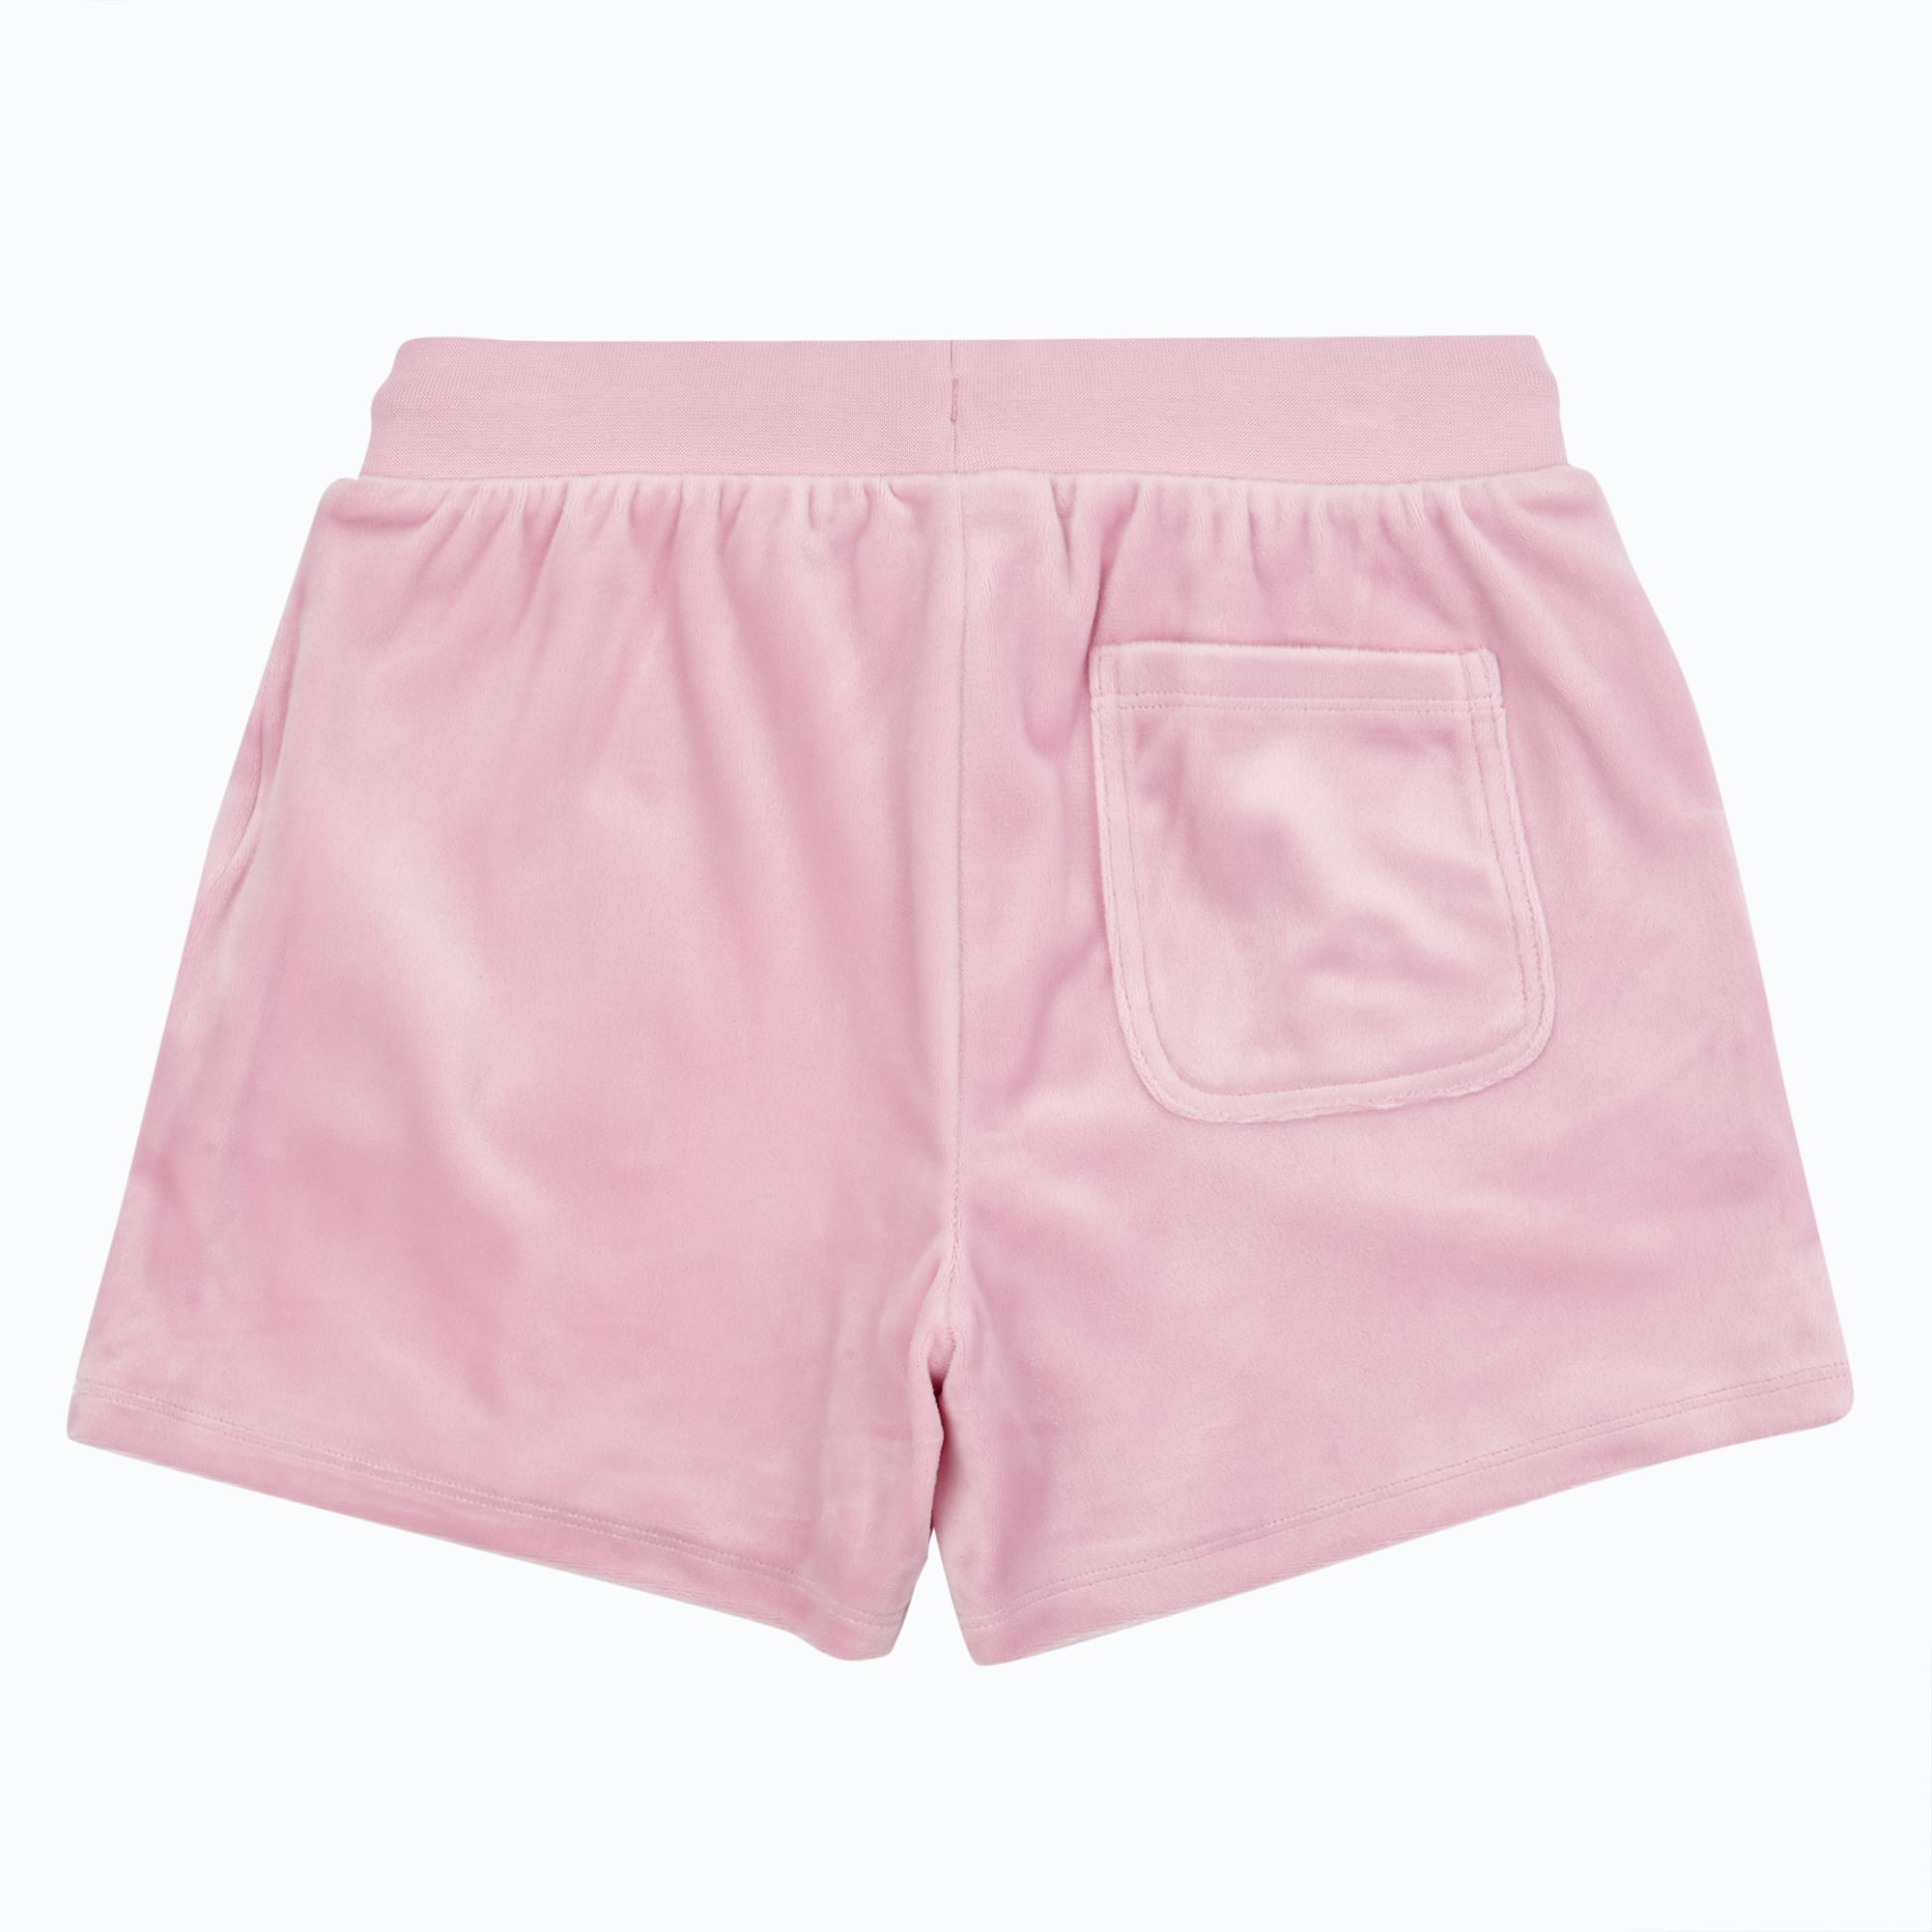 Juicy Couture pale pink velour shorts